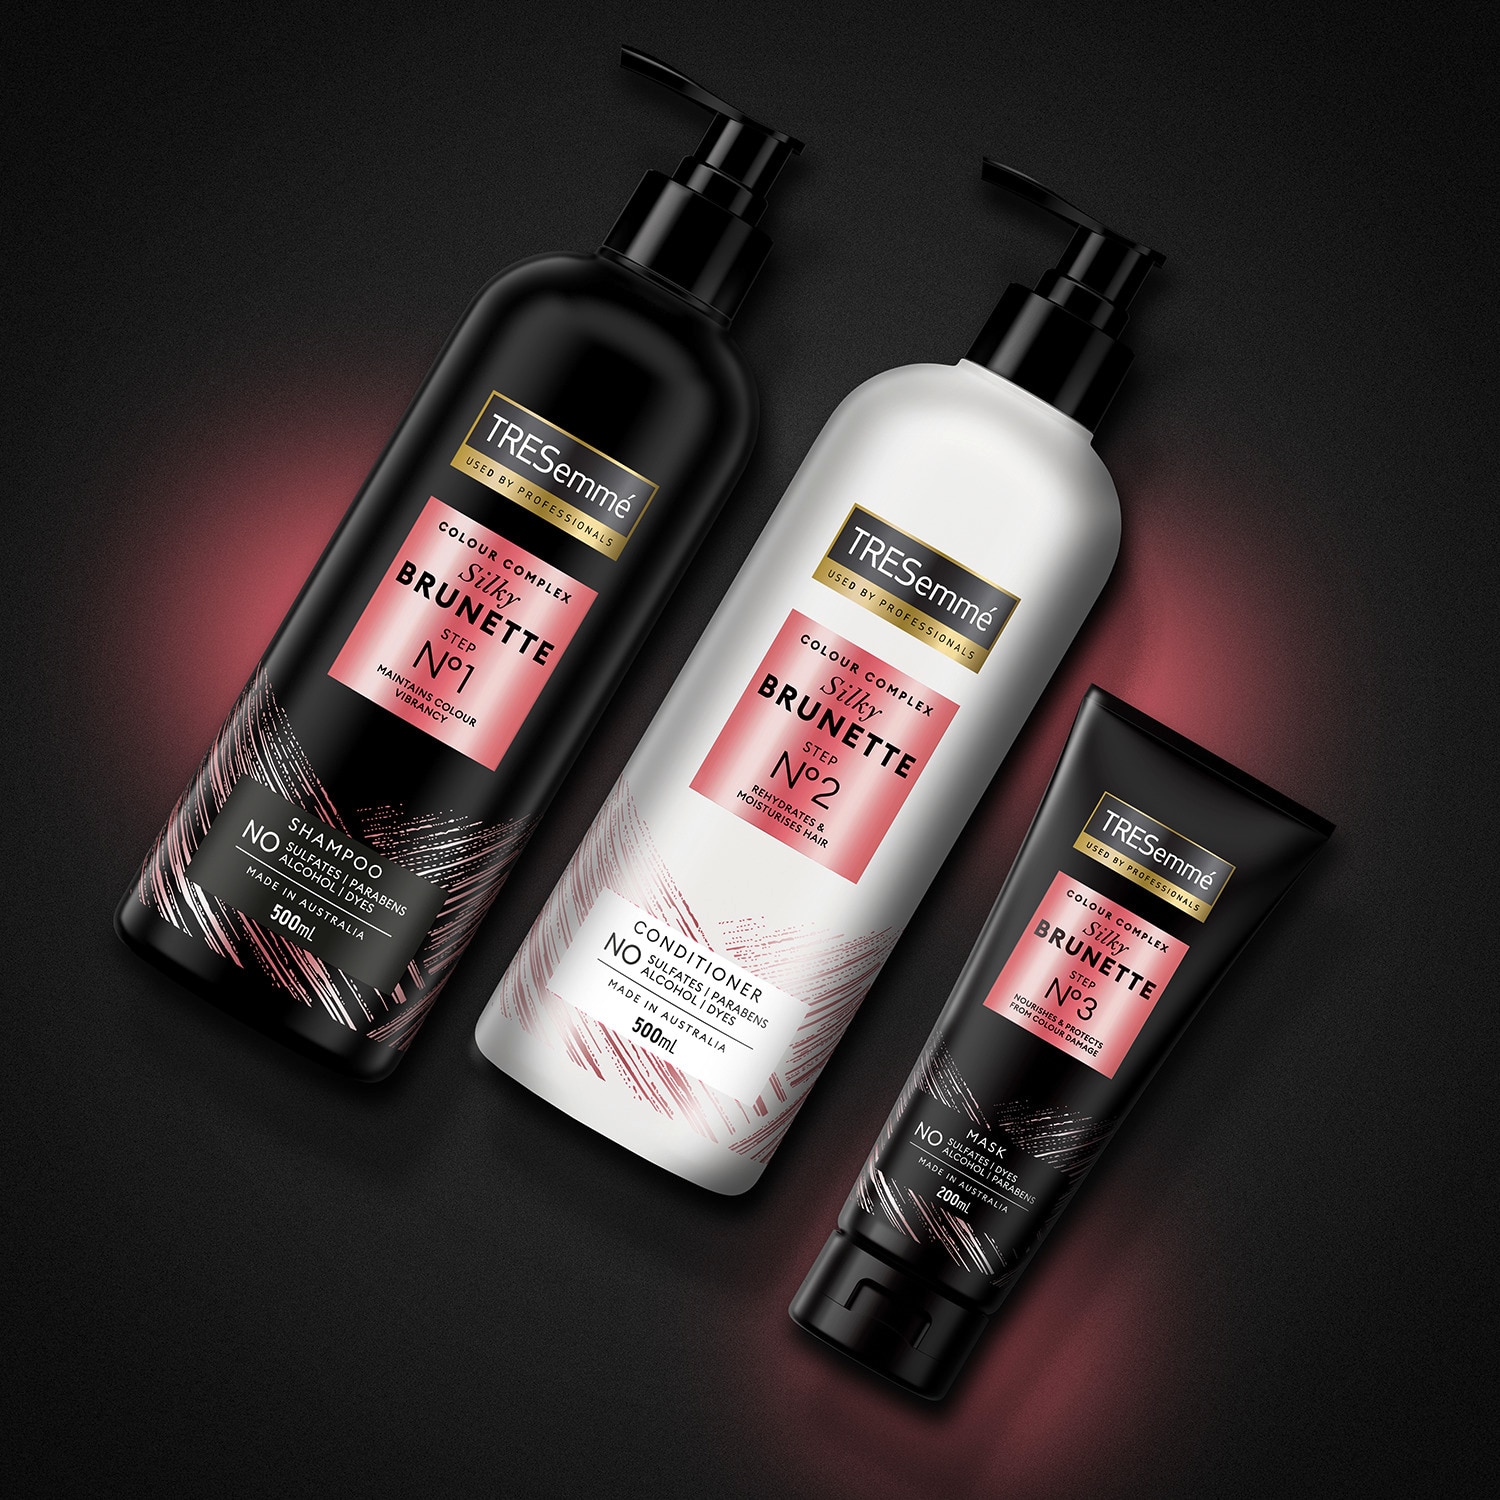 Product shot of TRESemmé Silky Brunette shampoo, conditioner, and mask